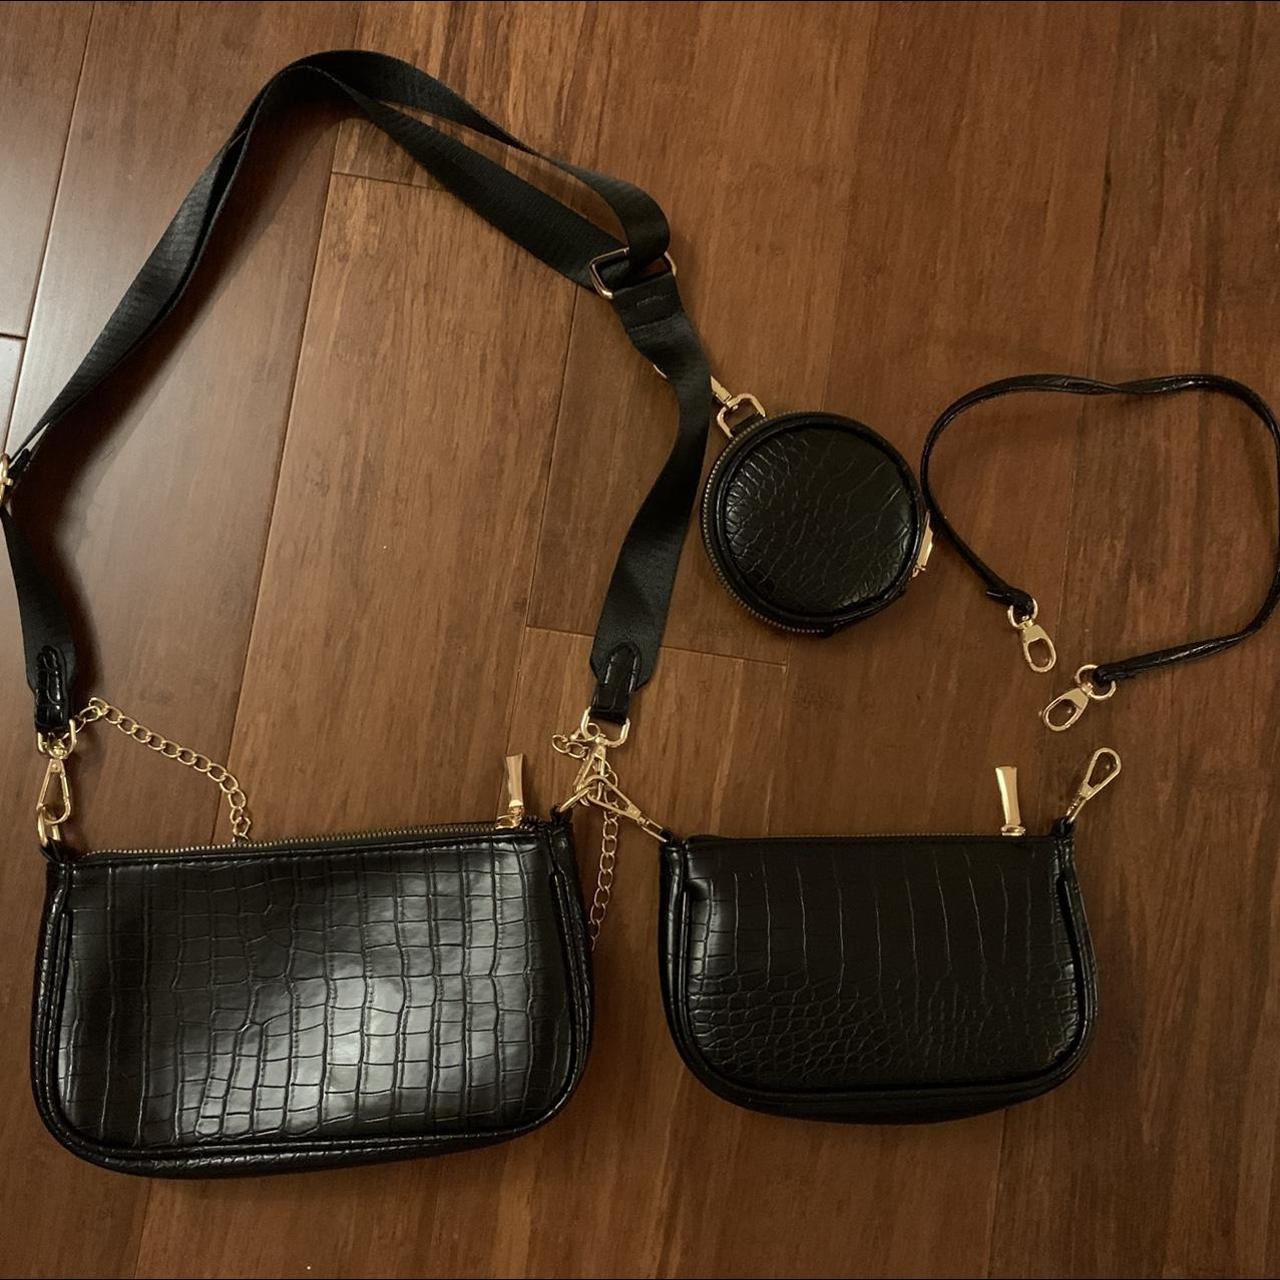 Black and gold purse with pretty strap - Depop